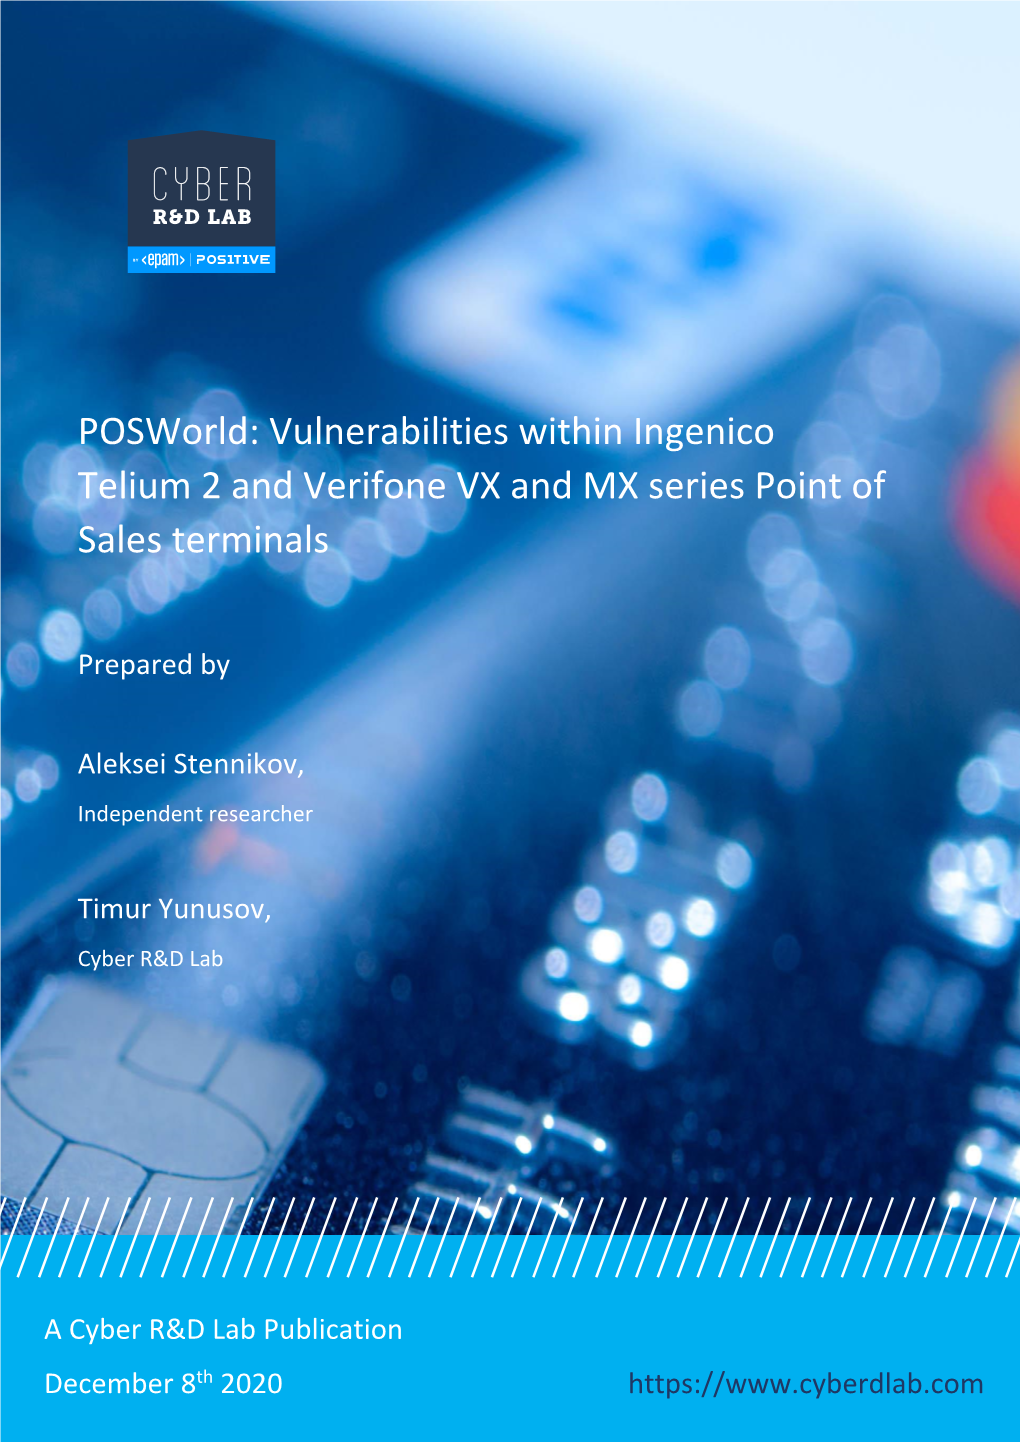 Posworld: Vulnerabilities Within Ingenico Telium 2 and Verifone VX and MX Series Point of Sales Terminals